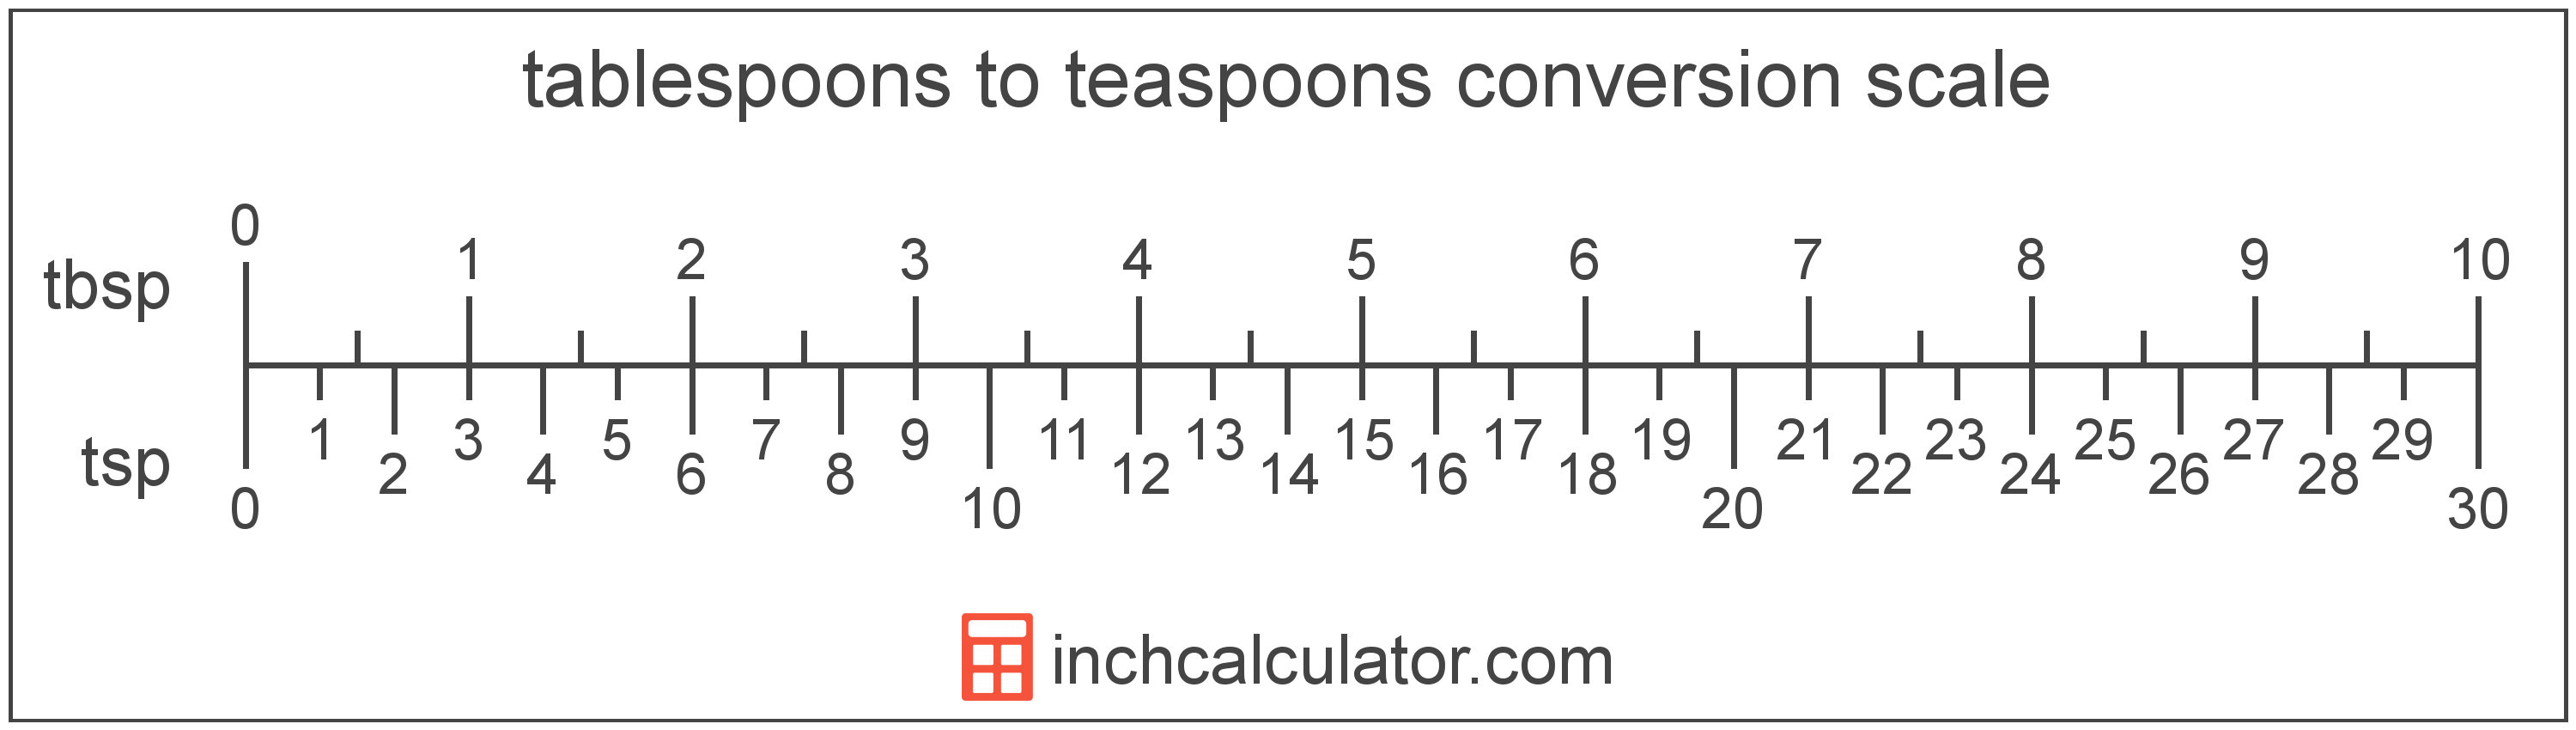 Convert Teaspoons To Tablespoons Tsp To Tbsp